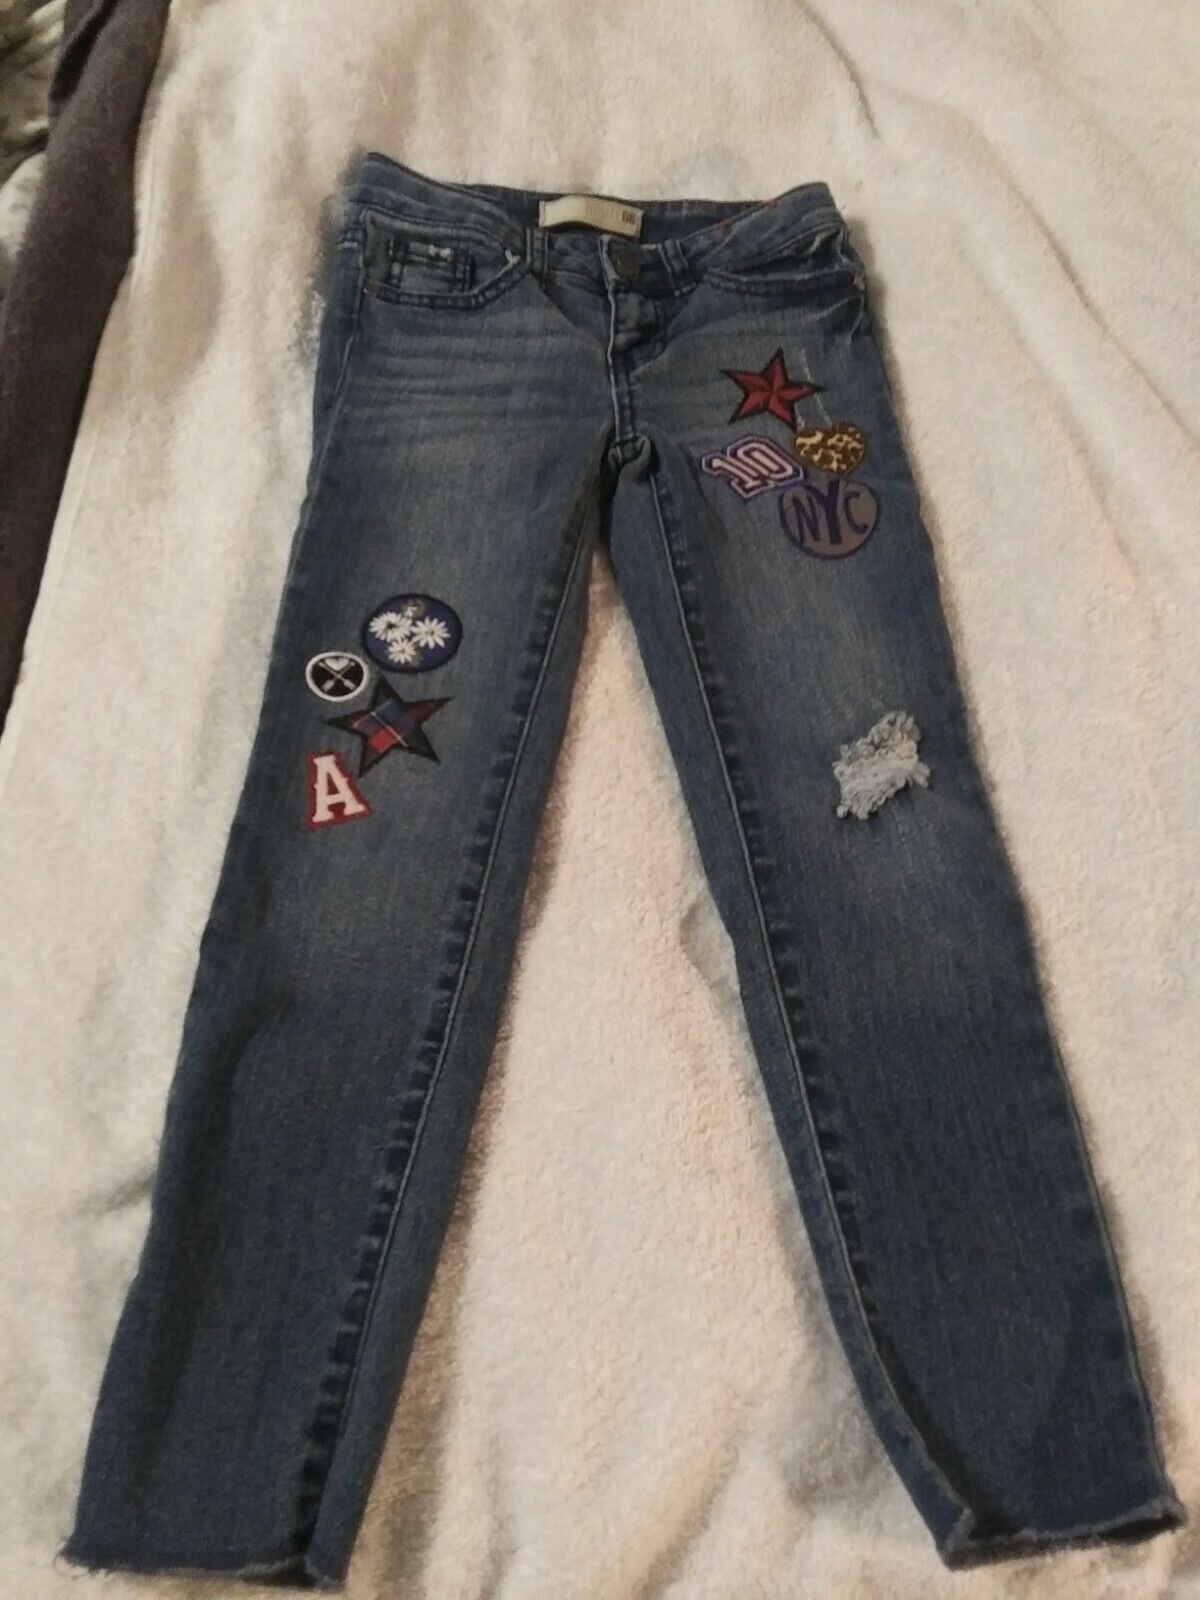 Girls Size 6 Skinny Route 66 Blue Jeans